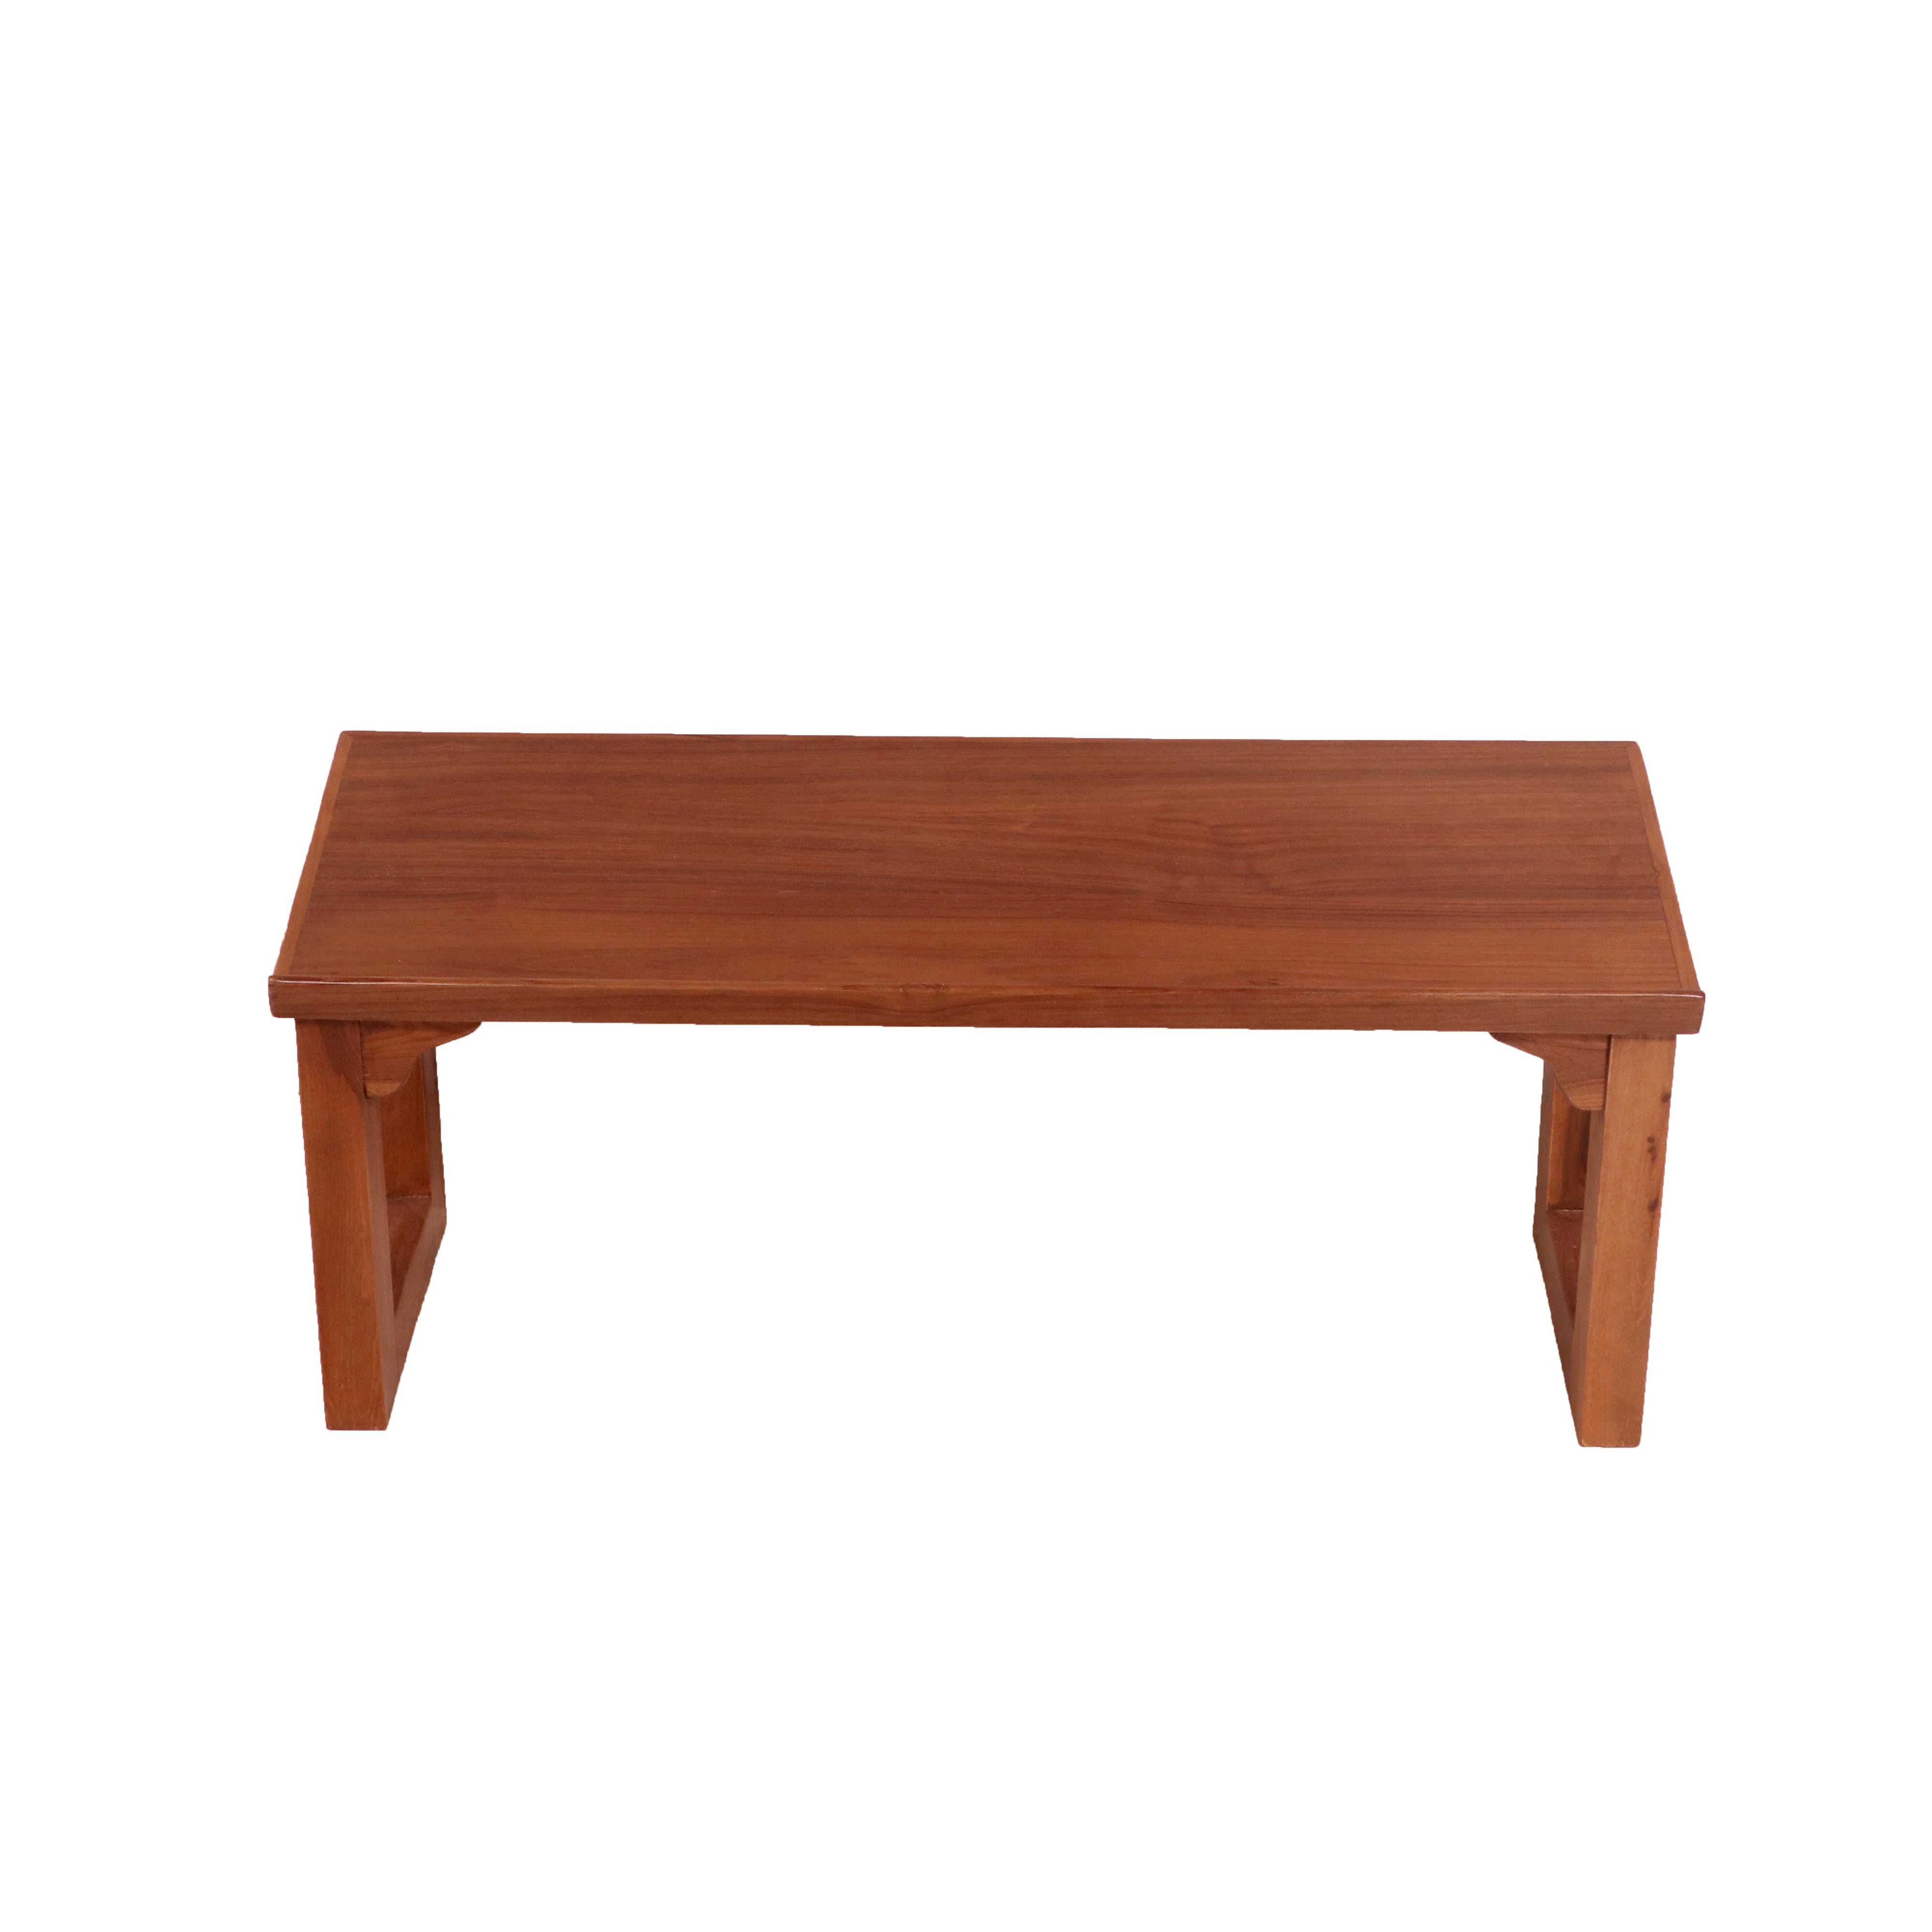 Long Munim Old School Wooden Table Lapdesk